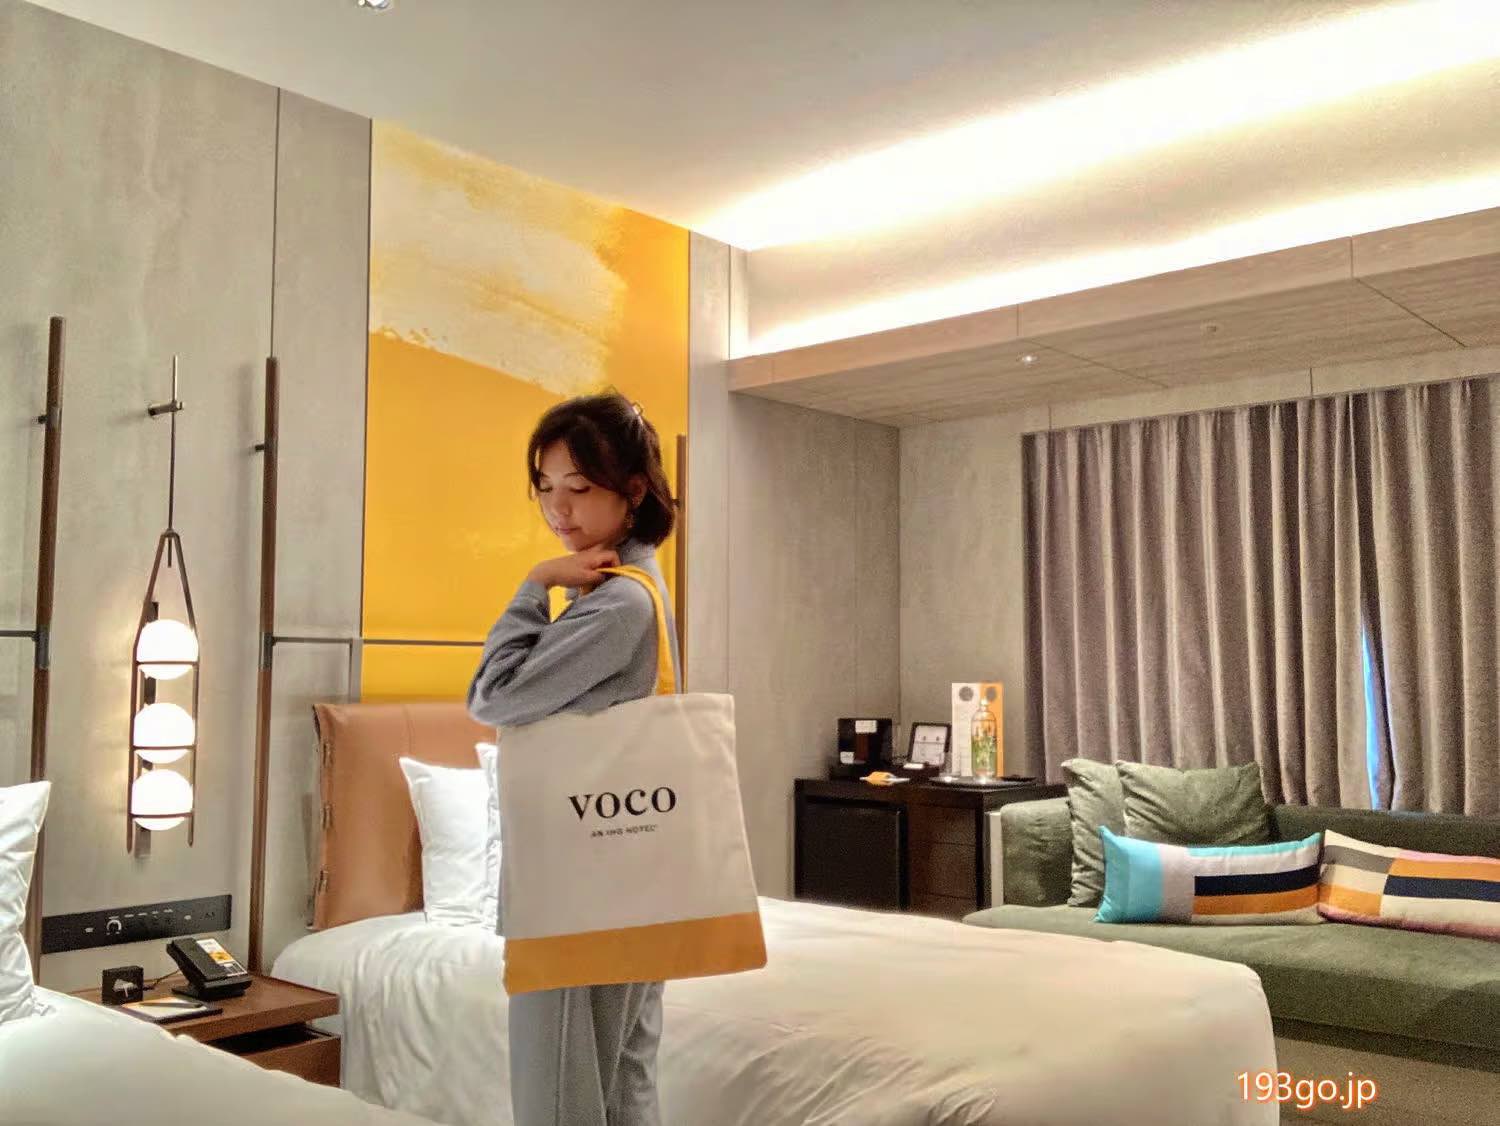 Stay in a stylish room with yellow accents at voco Osaka Central! Surrounded by carefully selected items